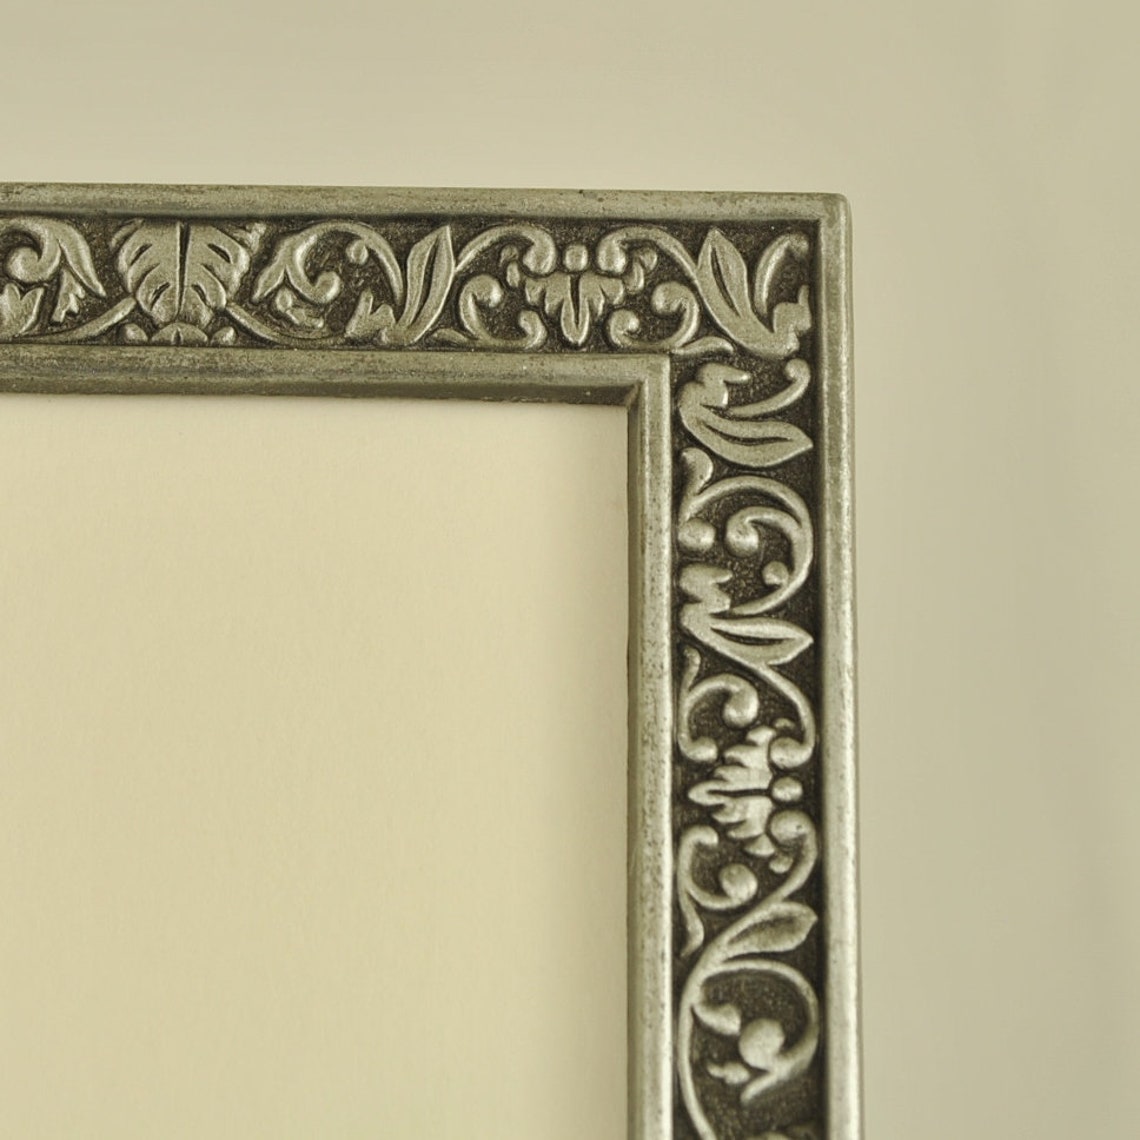 Ornate Pewter Picture Frame 5 X 7 Holds 4 Photos | Etsy